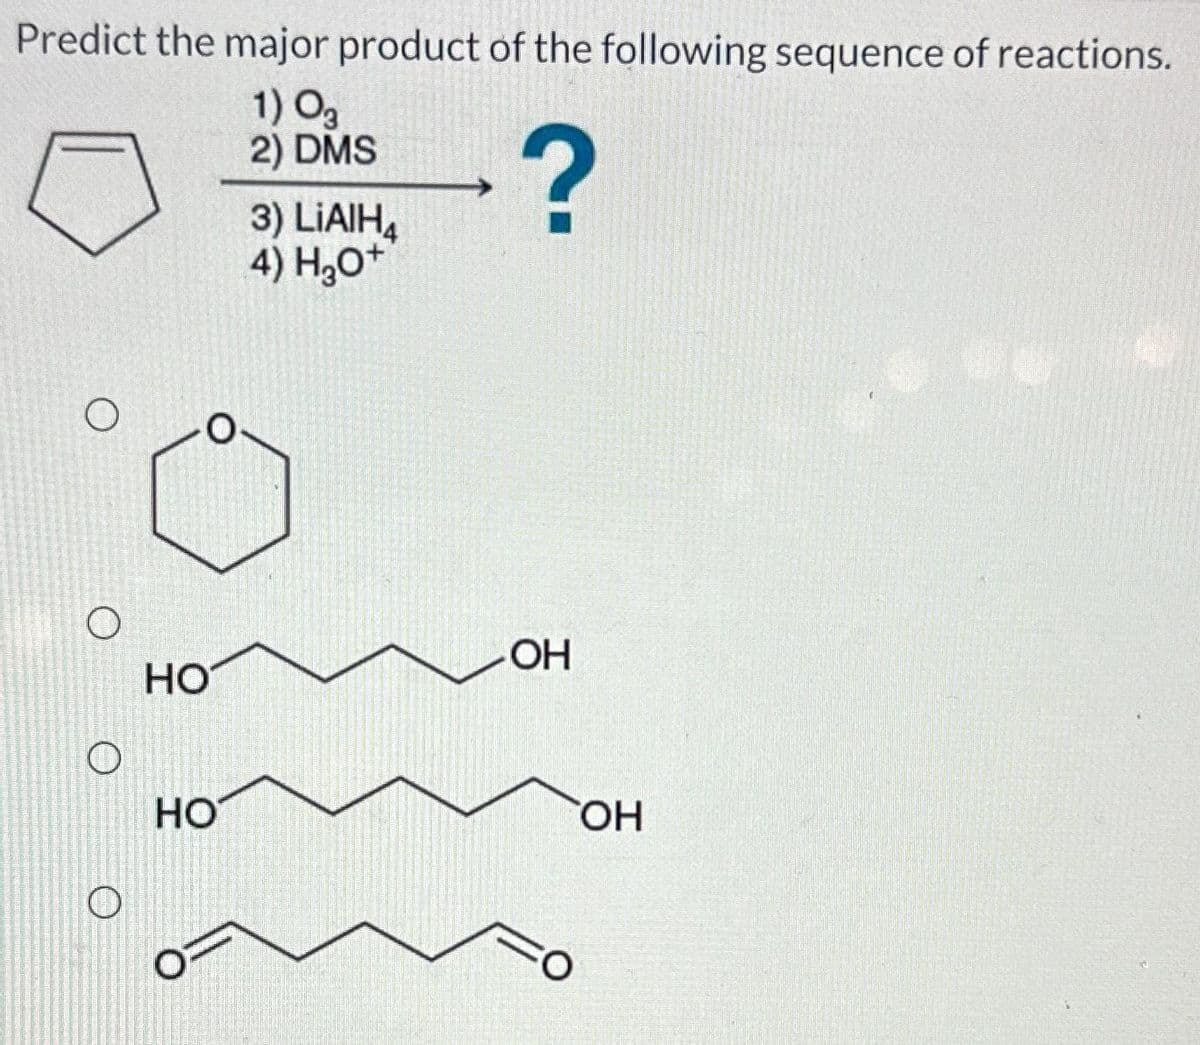 Predict the major product of the following sequence of reactions.
1) 03
2) DMS
?
O
O
O
O
HO
HO
3) LiAlH4
4) H₂O+
OH
FO
OH